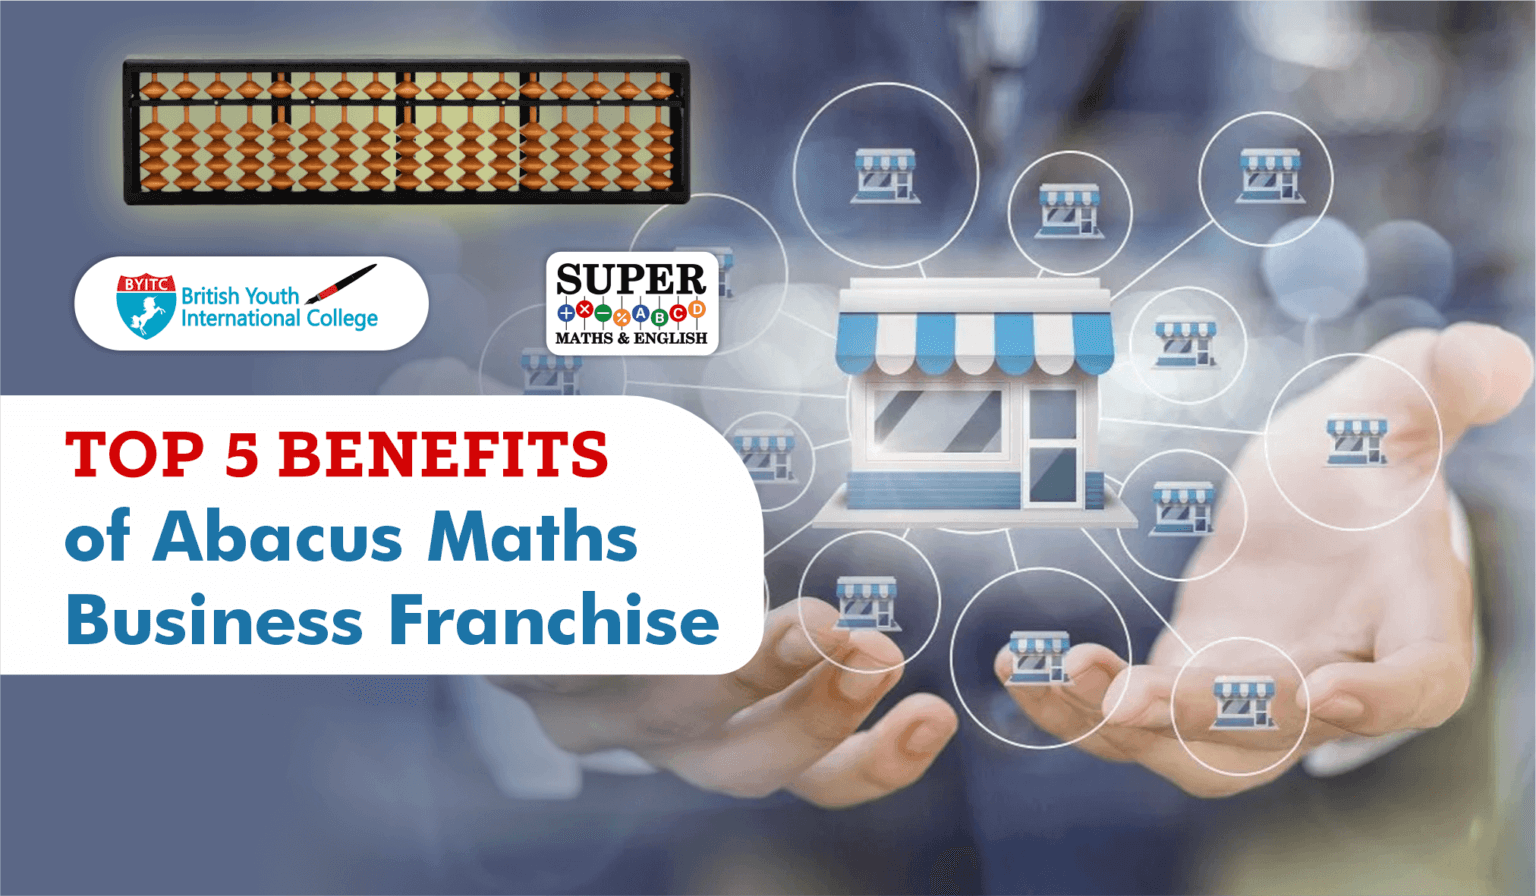 Abacus Maths Business Franchise